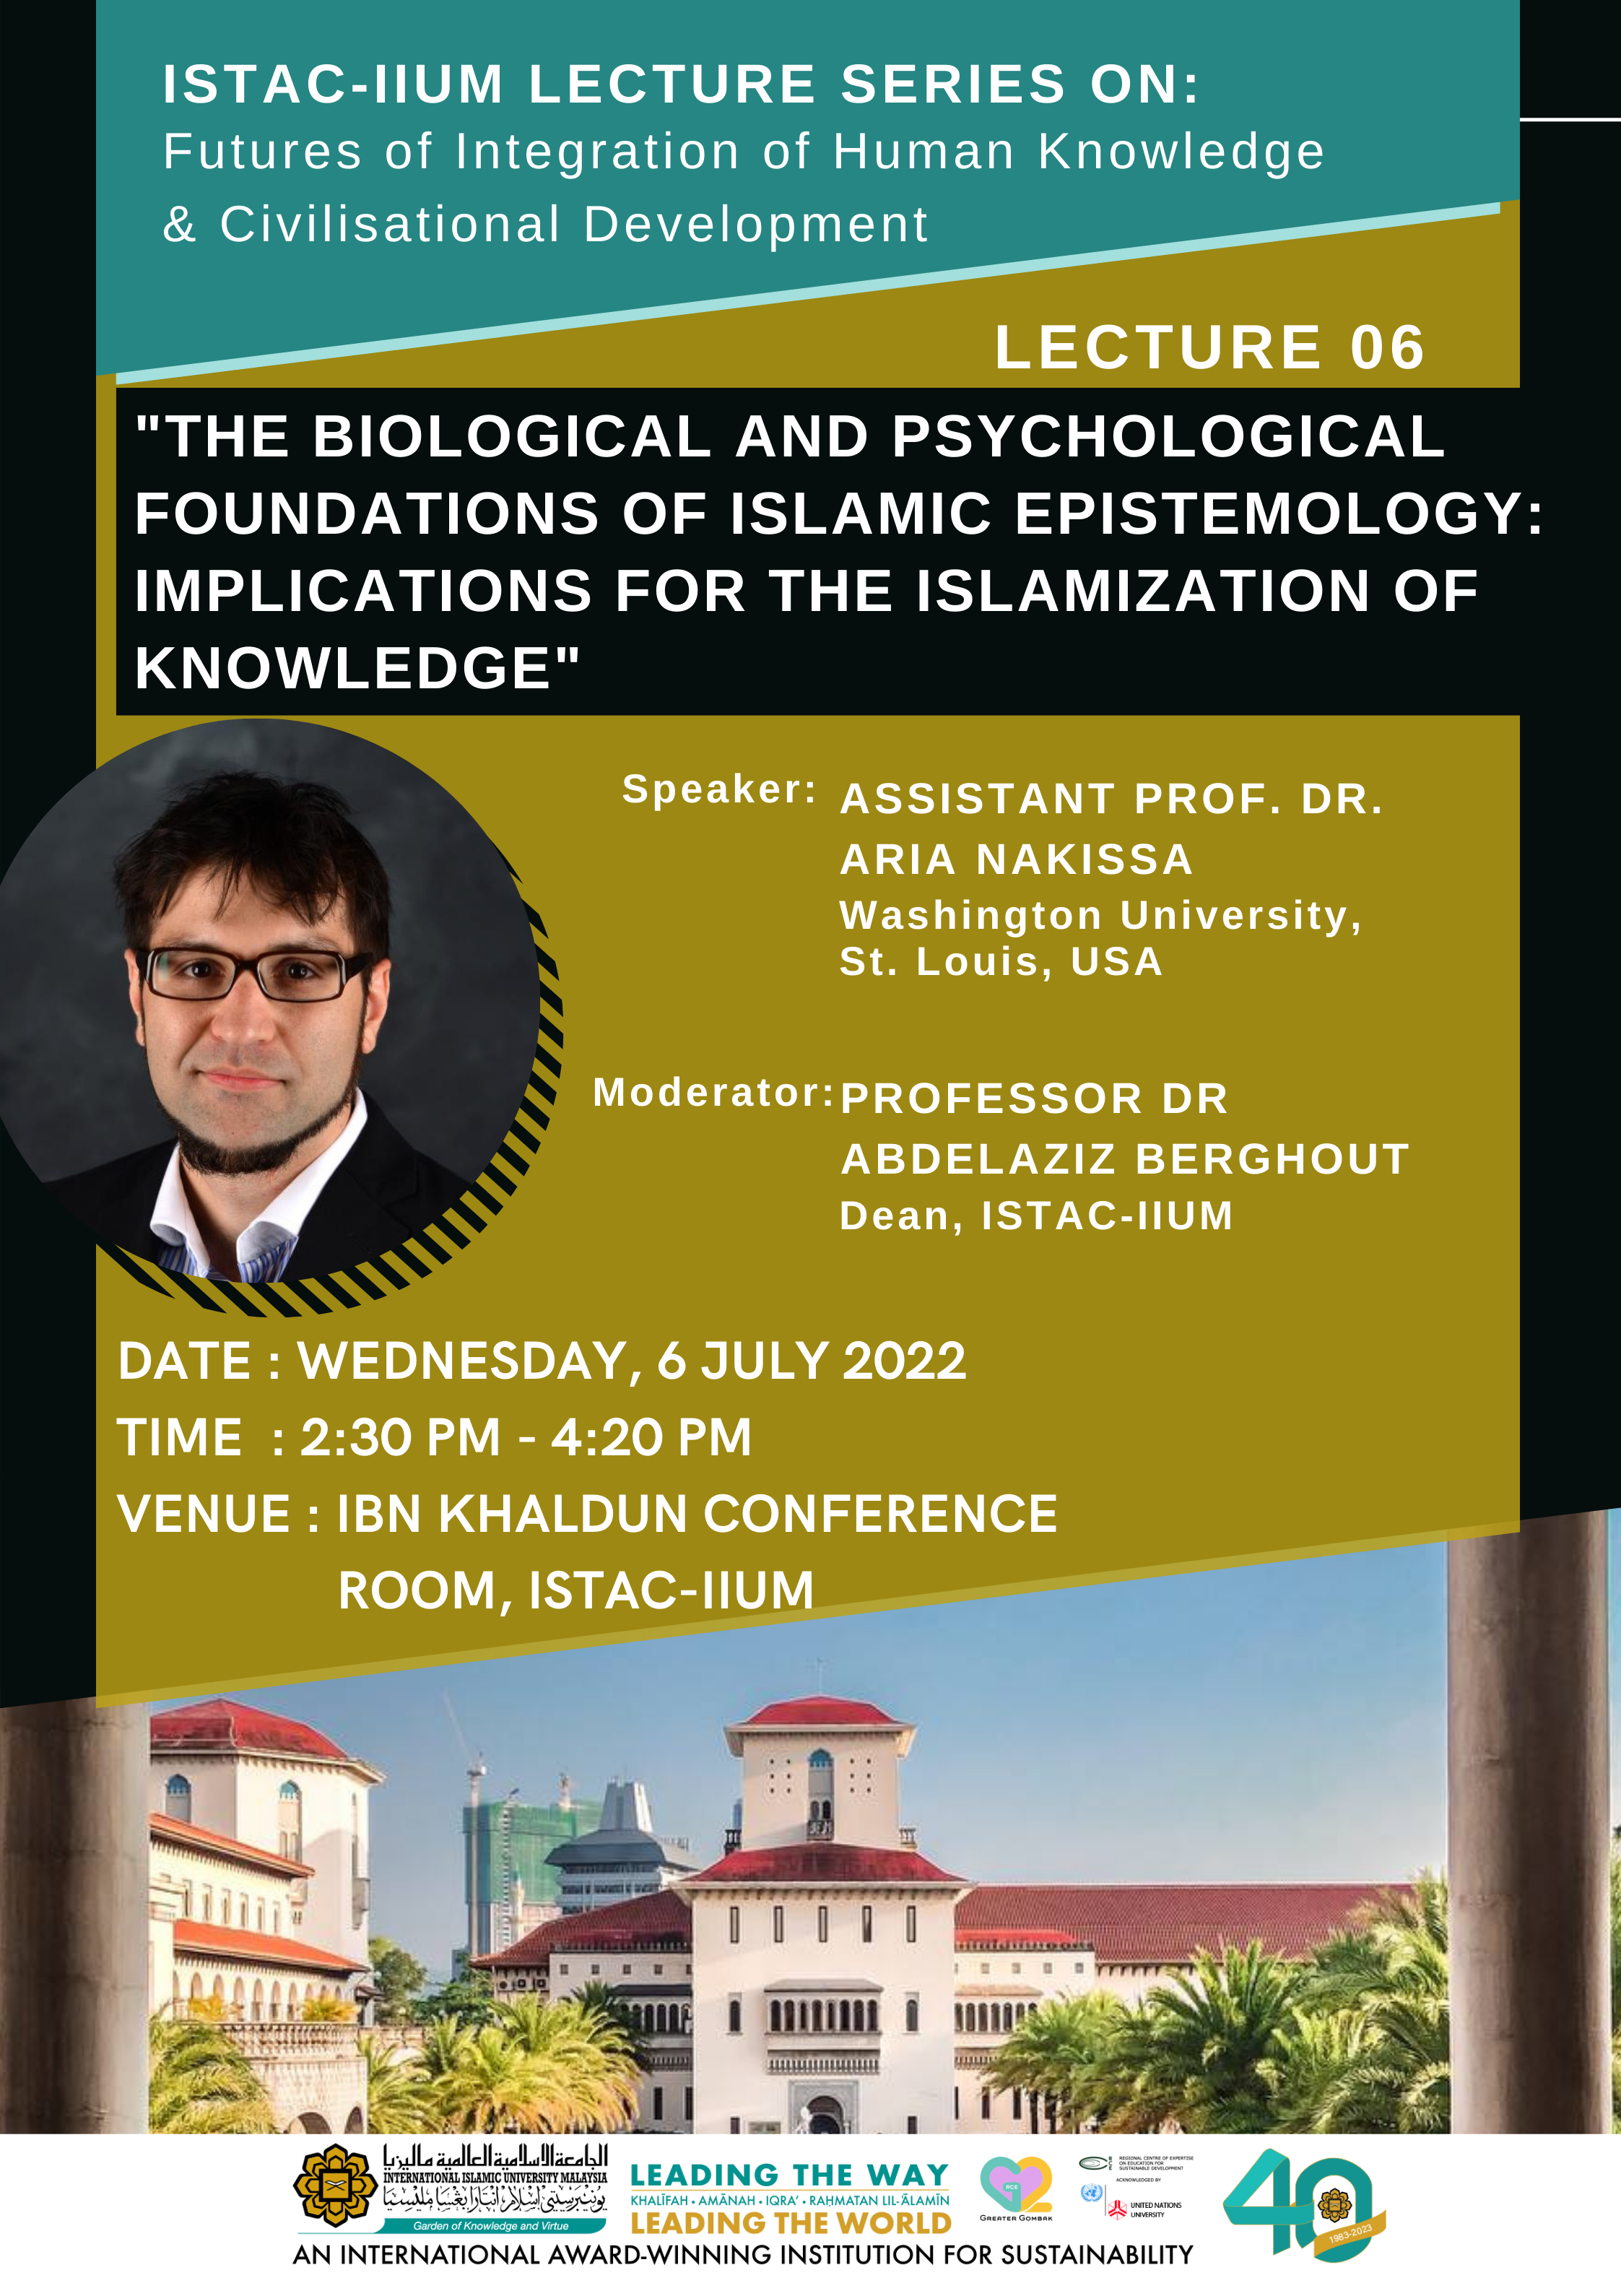 ISTAC-IIUM  LECTURE SERIES ON FUTURES OF INTEGRATION OF HUMAN KNOWLEDGE & CIVILISATIONAL DEVELOPMENT_LECTURE 6